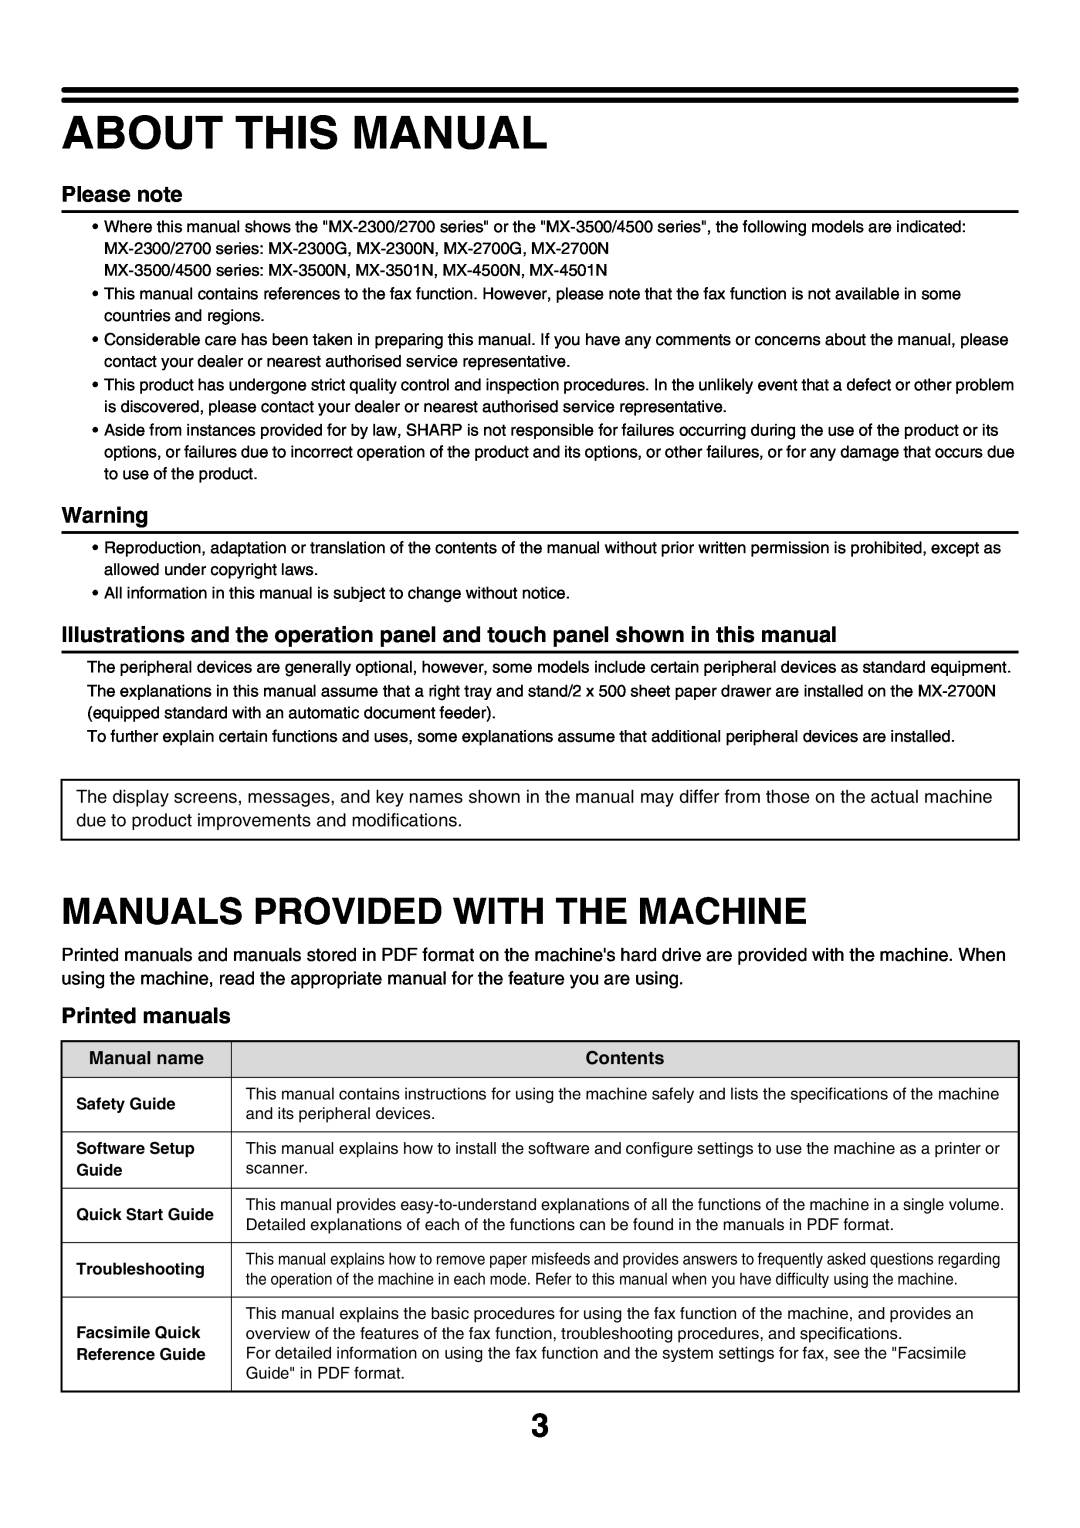 Sharp MX-2300N, MX-4501N, MX-2700N About This Manual, Manuals Provided With The Machine, Please note, Printed manuals 